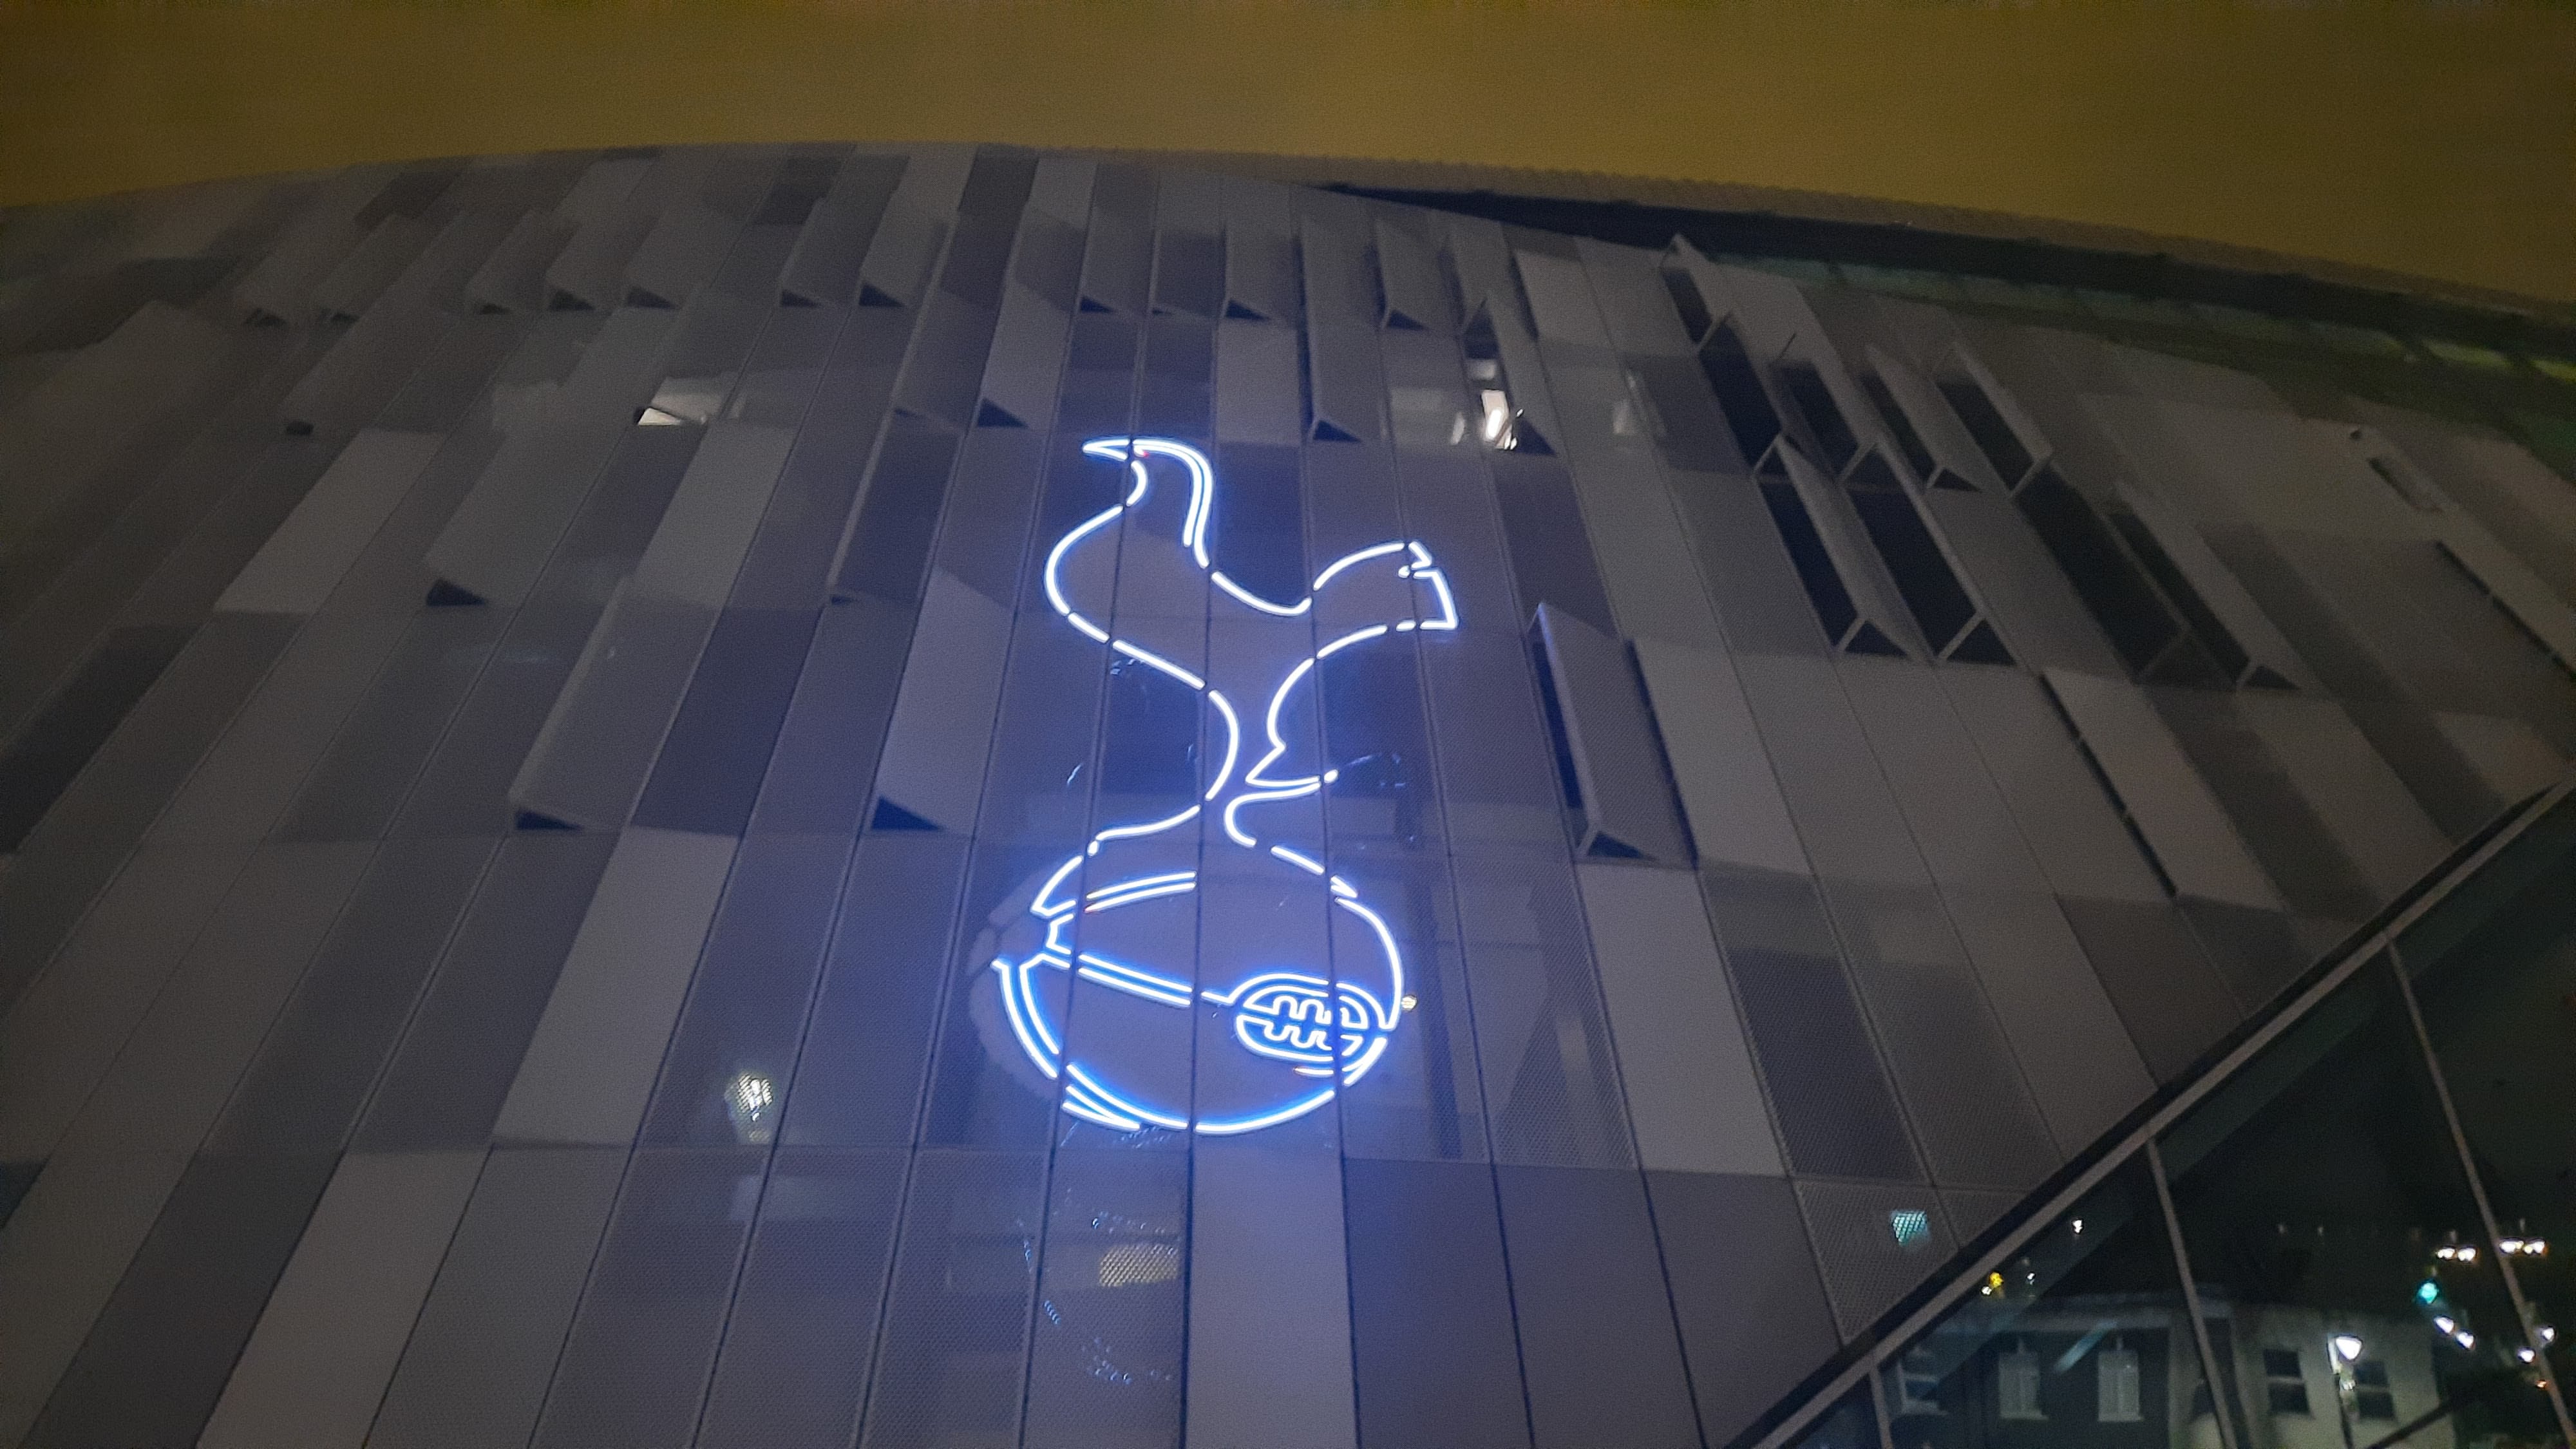 A picture of the Tottenham Hotspur badge lit up in blue on the front of their stadium